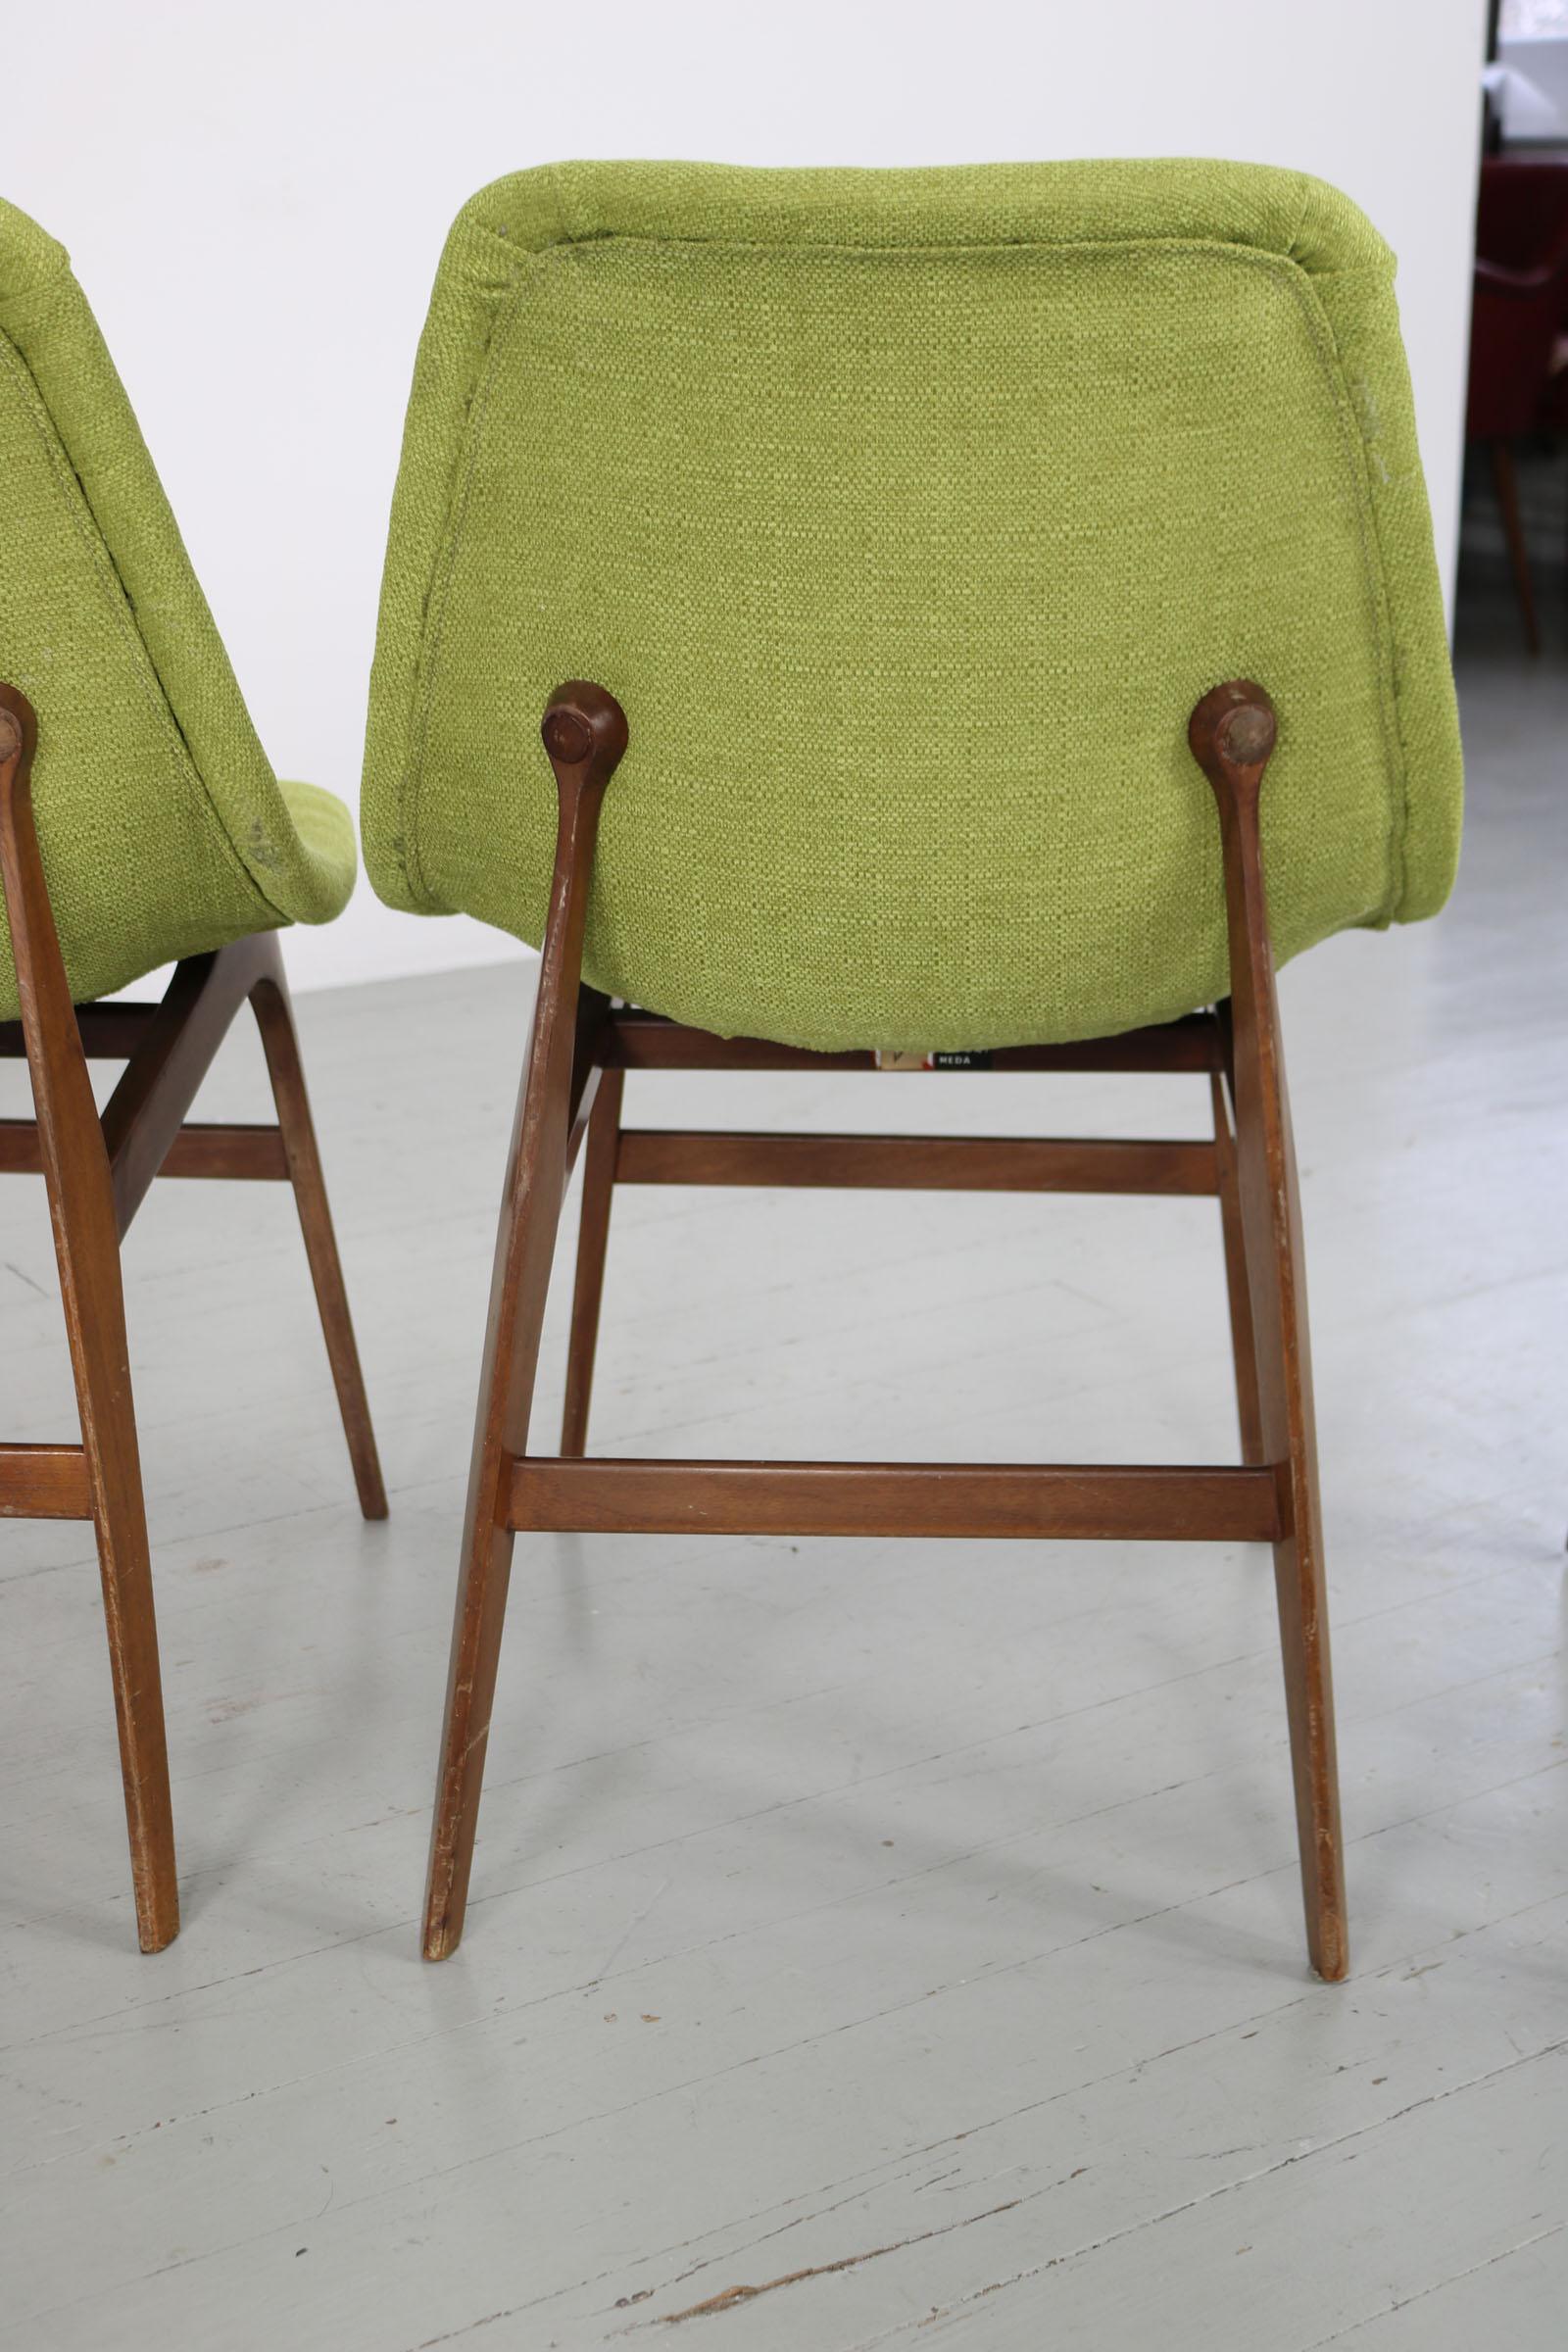 Set of 4 Busnelli Meda Teak Chairs, Italy 1960s For Sale 3